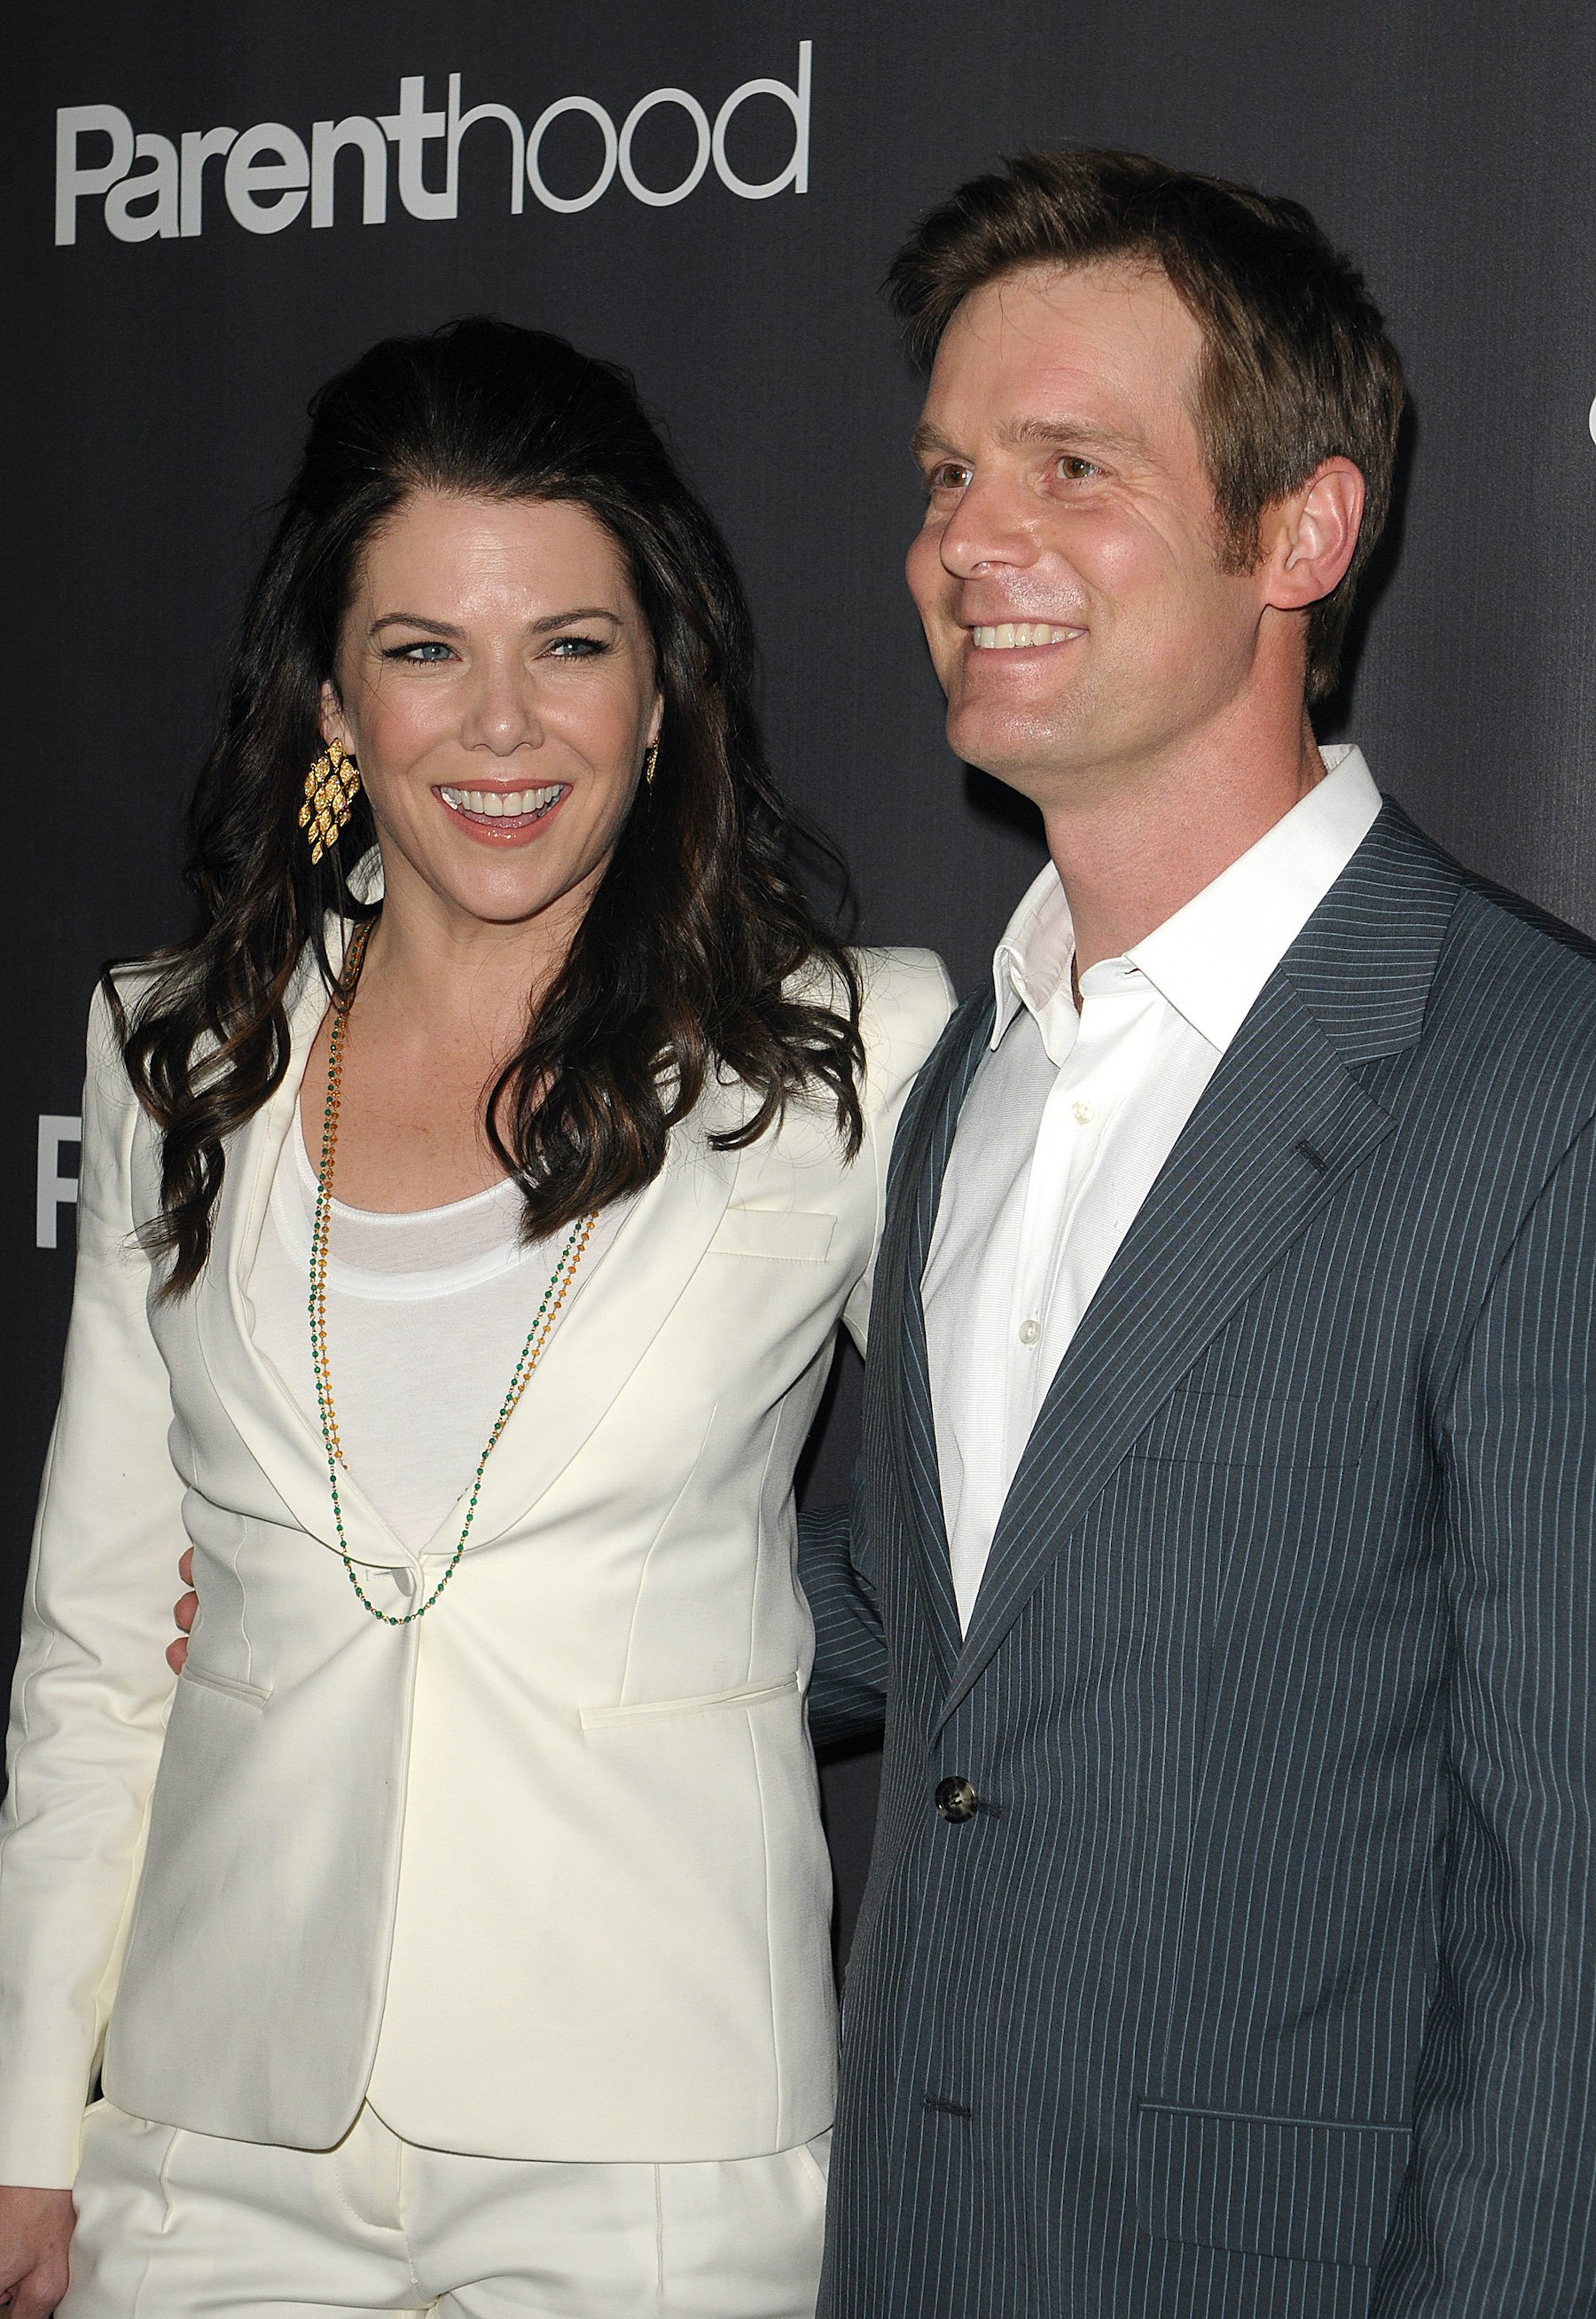 Lauren Graham and Peter Krause attend a premiere screening of 'Parenthood'